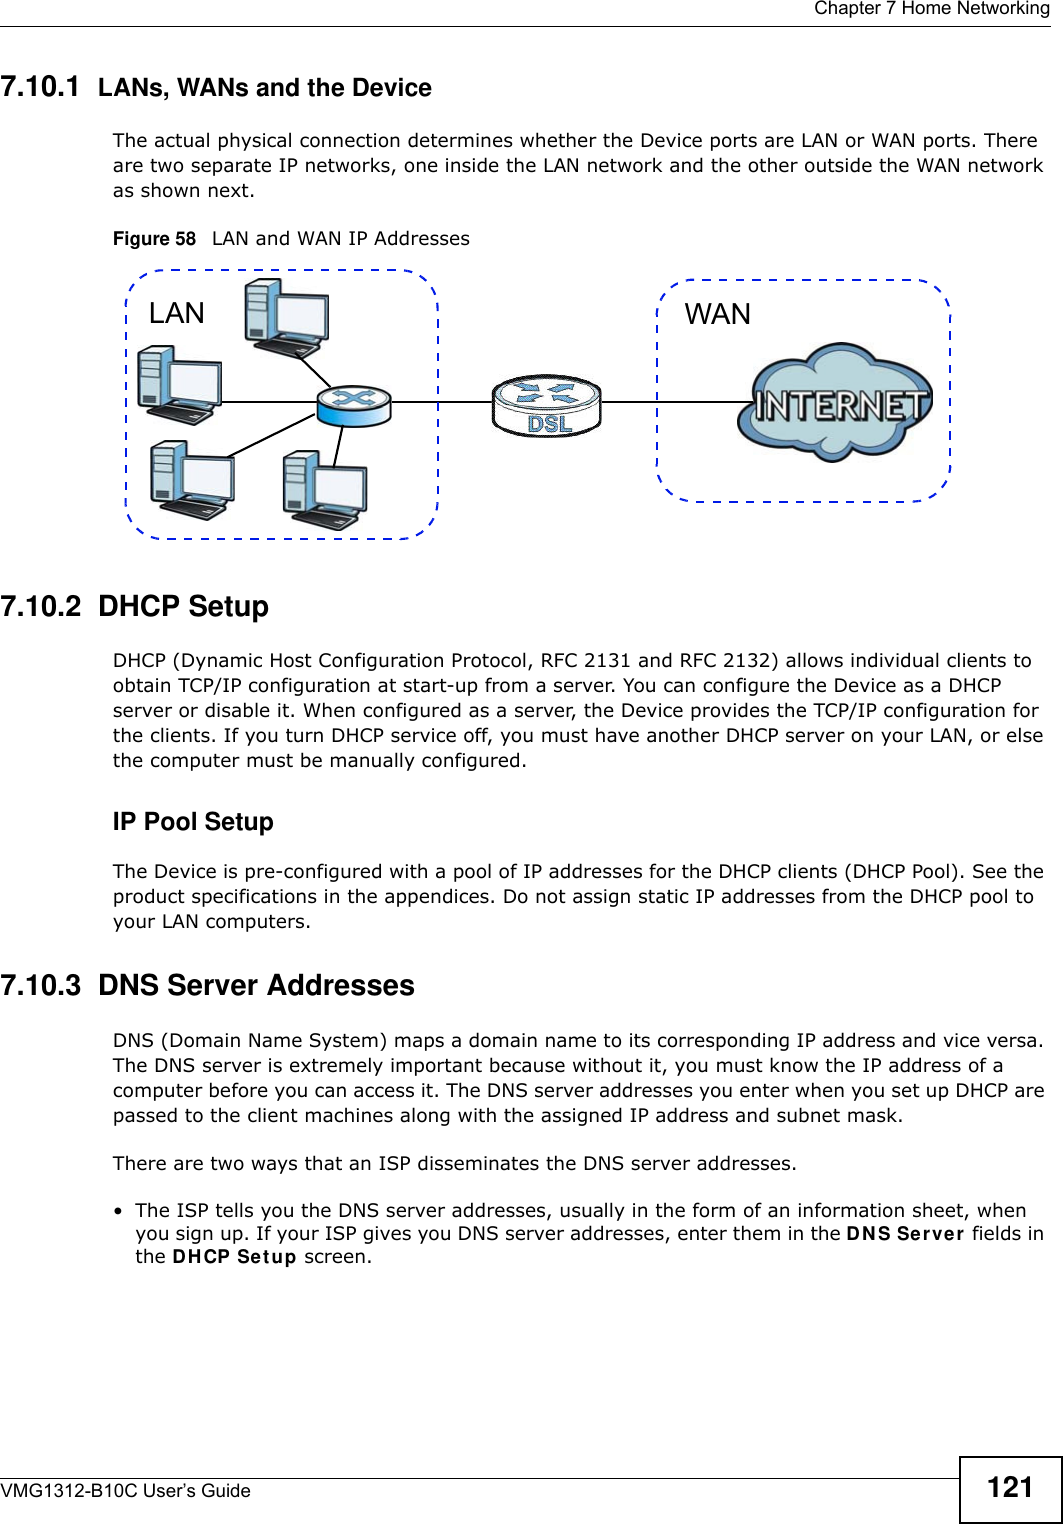  Chapter 7 Home NetworkingVMG1312-B10C User’s Guide 1217.10.1  LANs, WANs and the DeviceThe actual physical connection determines whether the Device ports are LAN or WAN ports. There are two separate IP networks, one inside the LAN network and the other outside the WAN network as shown next.Figure 58   LAN and WAN IP Addresses7.10.2  DHCP SetupDHCP (Dynamic Host Configuration Protocol, RFC 2131 and RFC 2132) allows individual clients to obtain TCP/IP configuration at start-up from a server. You can configure the Device as a DHCP server or disable it. When configured as a server, the Device provides the TCP/IP configuration for the clients. If you turn DHCP service off, you must have another DHCP server on your LAN, or else the computer must be manually configured. IP Pool SetupThe Device is pre-configured with a pool of IP addresses for the DHCP clients (DHCP Pool). See the product specifications in the appendices. Do not assign static IP addresses from the DHCP pool to your LAN computers.7.10.3  DNS Server Addresses DNS (Domain Name System) maps a domain name to its corresponding IP address and vice versa. The DNS server is extremely important because without it, you must know the IP address of a computer before you can access it. The DNS server addresses you enter when you set up DHCP are passed to the client machines along with the assigned IP address and subnet mask.There are two ways that an ISP disseminates the DNS server addresses. • The ISP tells you the DNS server addresses, usually in the form of an information sheet, when you sign up. If your ISP gives you DNS server addresses, enter them in the DN S Se rver fields in the DH CP Set up screen.WANLAN